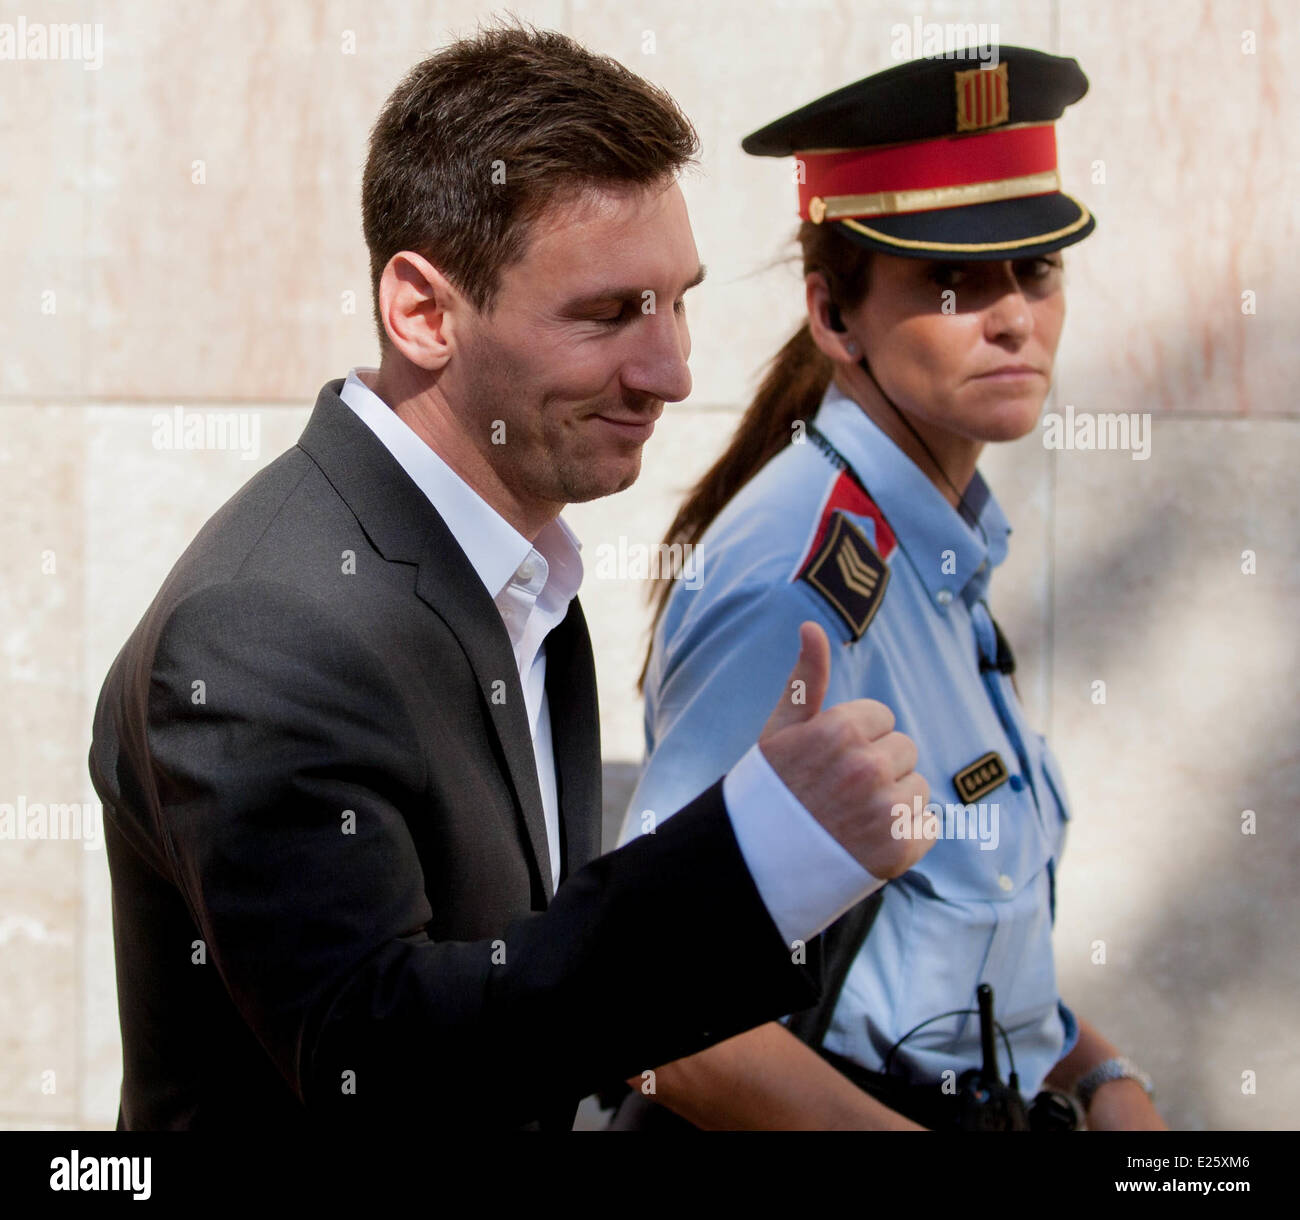 Barcelona's Argentine soccer player Lionel Messi arrives at a Spanish court over tax fraud allegations  Featuring: Lionel Messi Where: Gava, Spain When: 27 Sep 2013 Stock Photo